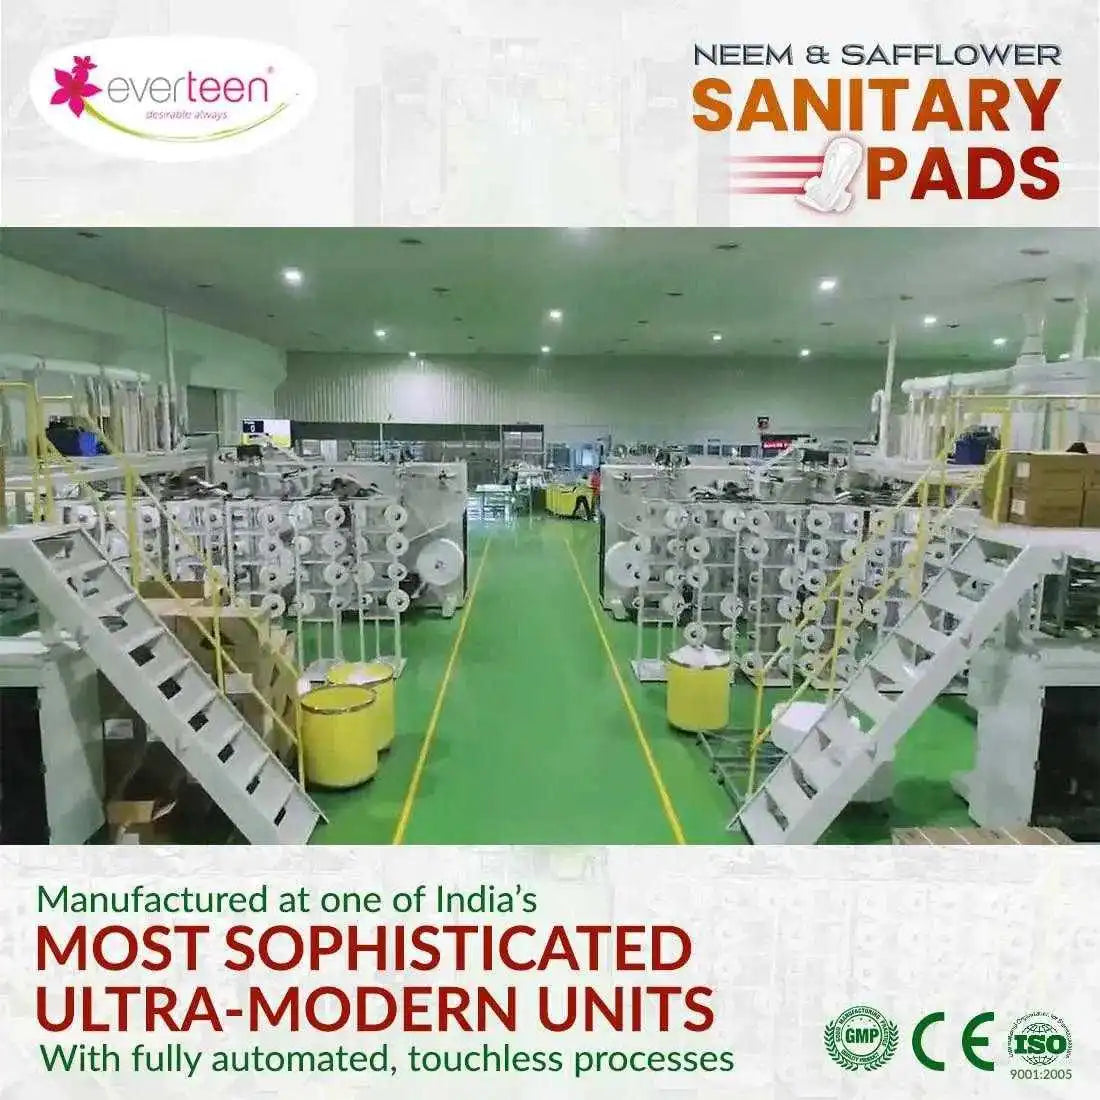 everteen sanitary pads are manufactured at most sophisticated manufacturing units - everteen-neud.com